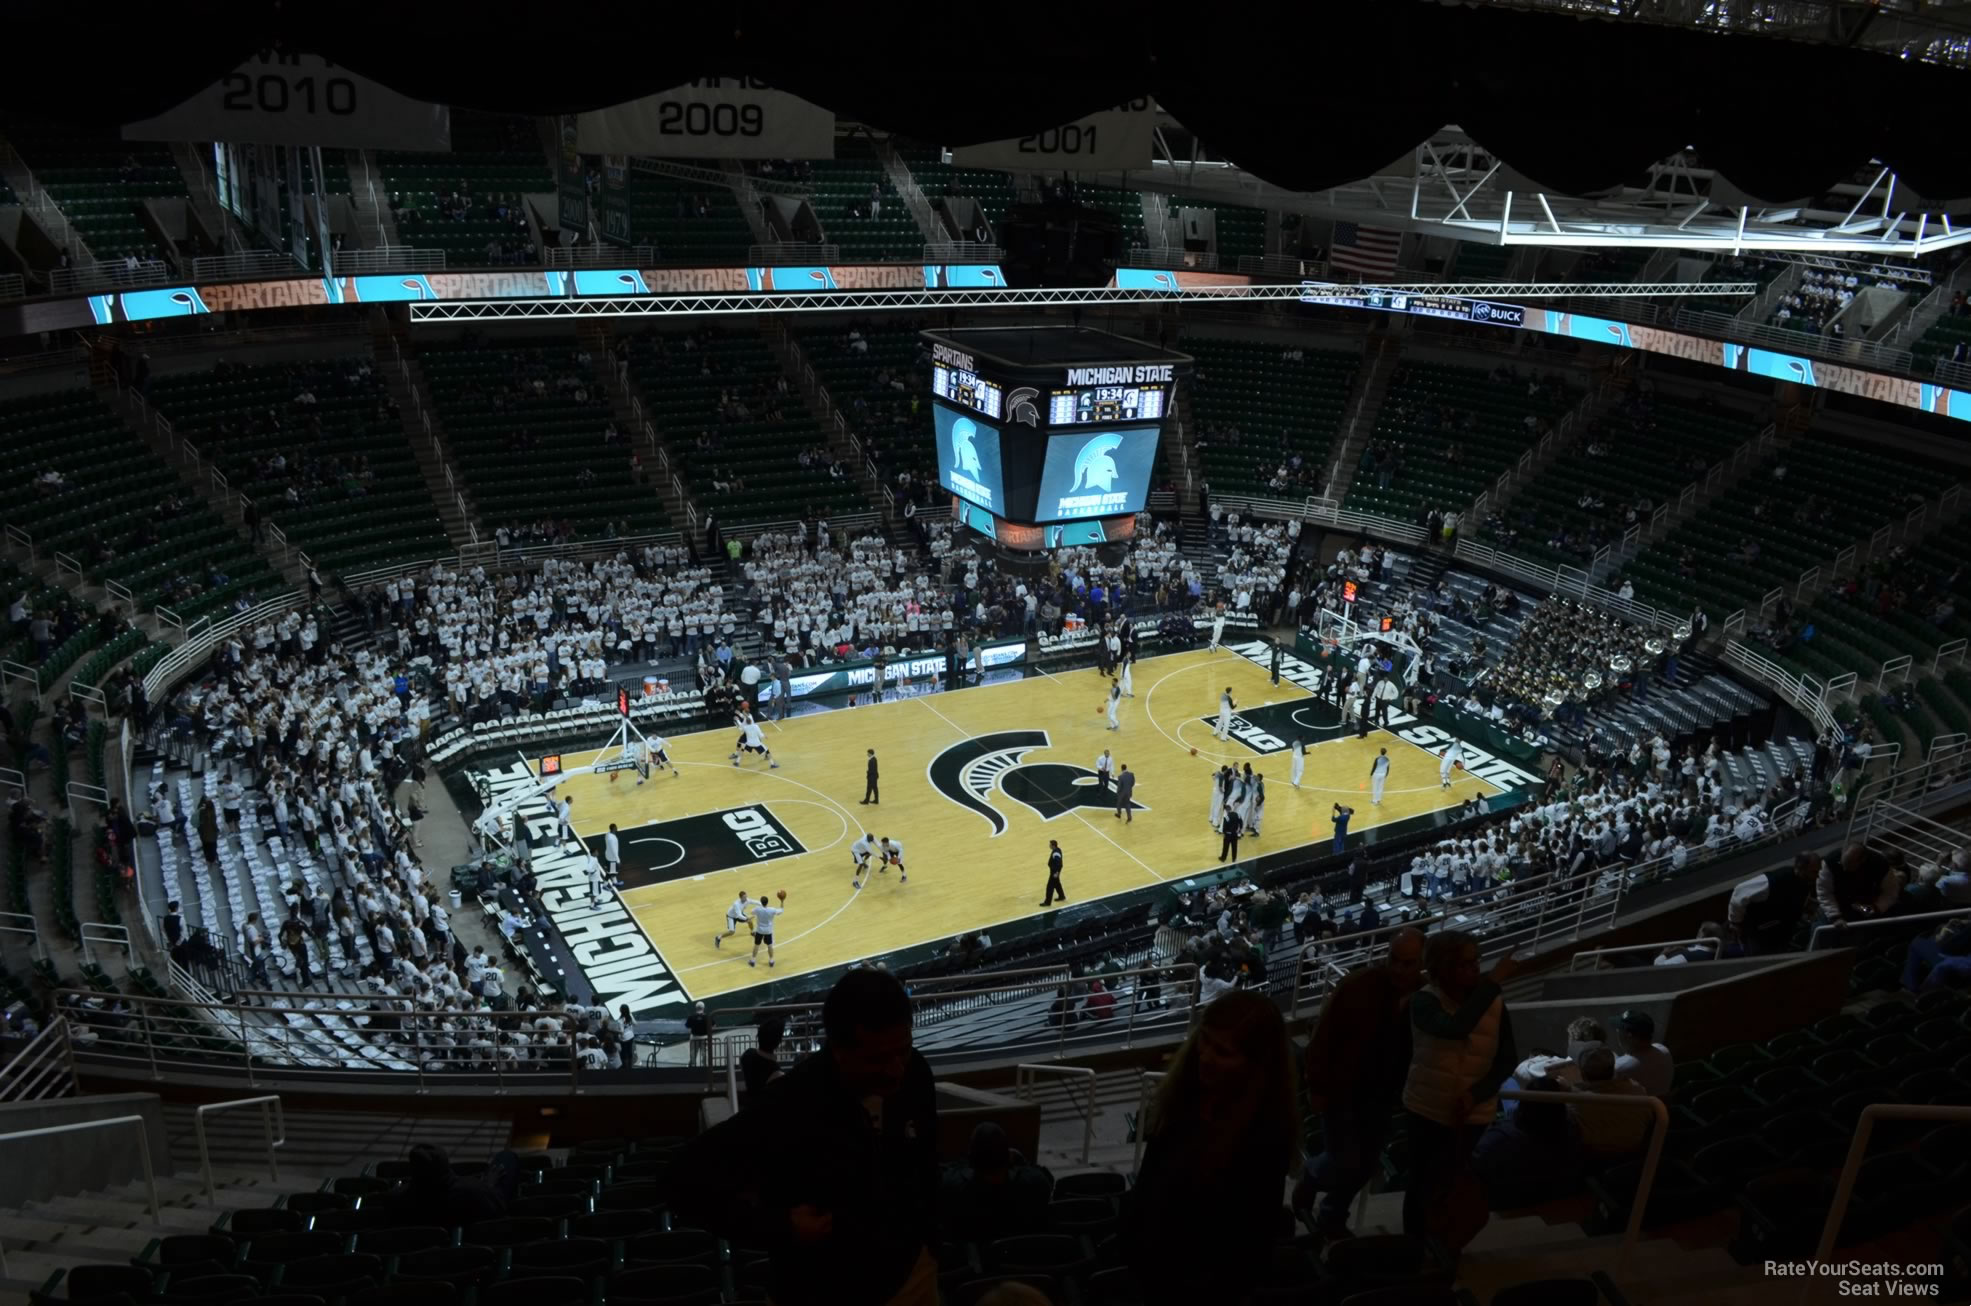 section 230, row 15 seat view  - breslin center